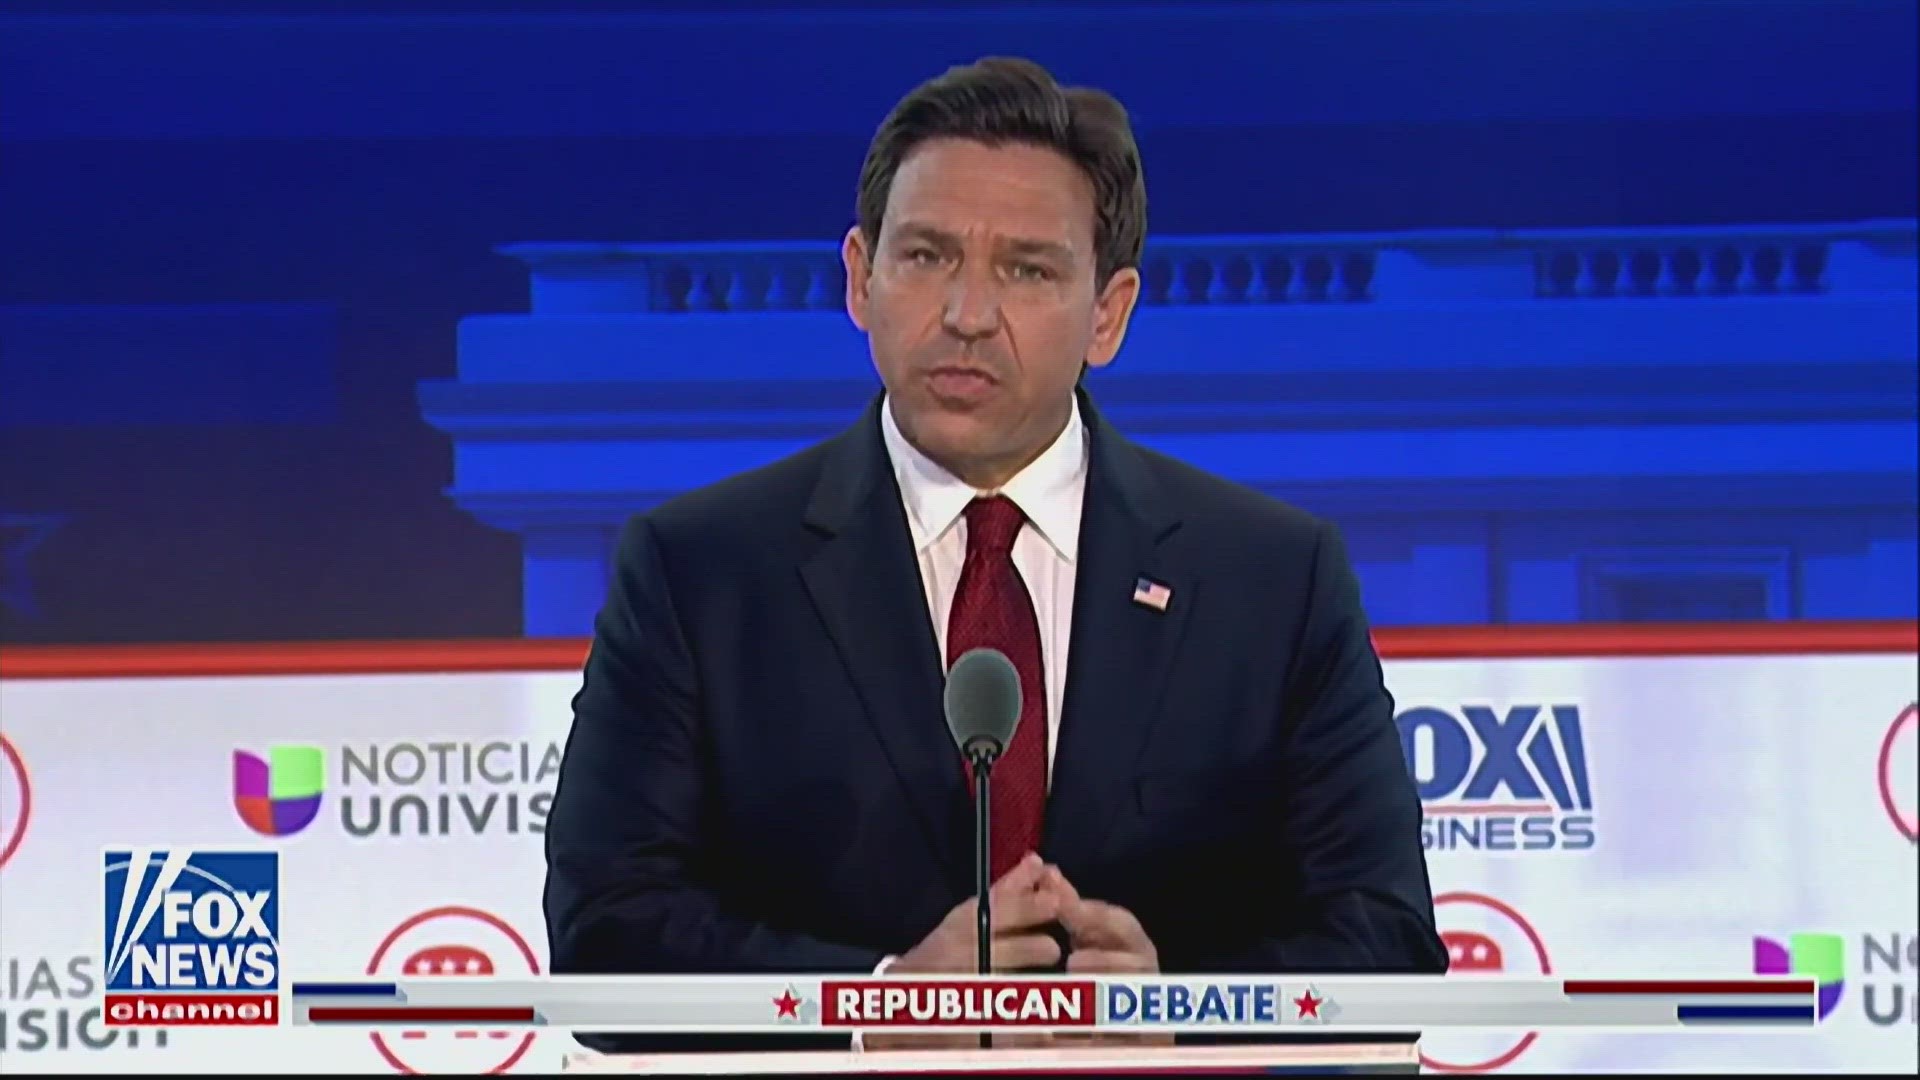 Seven leading Republican candidates shared a debate stage in California.